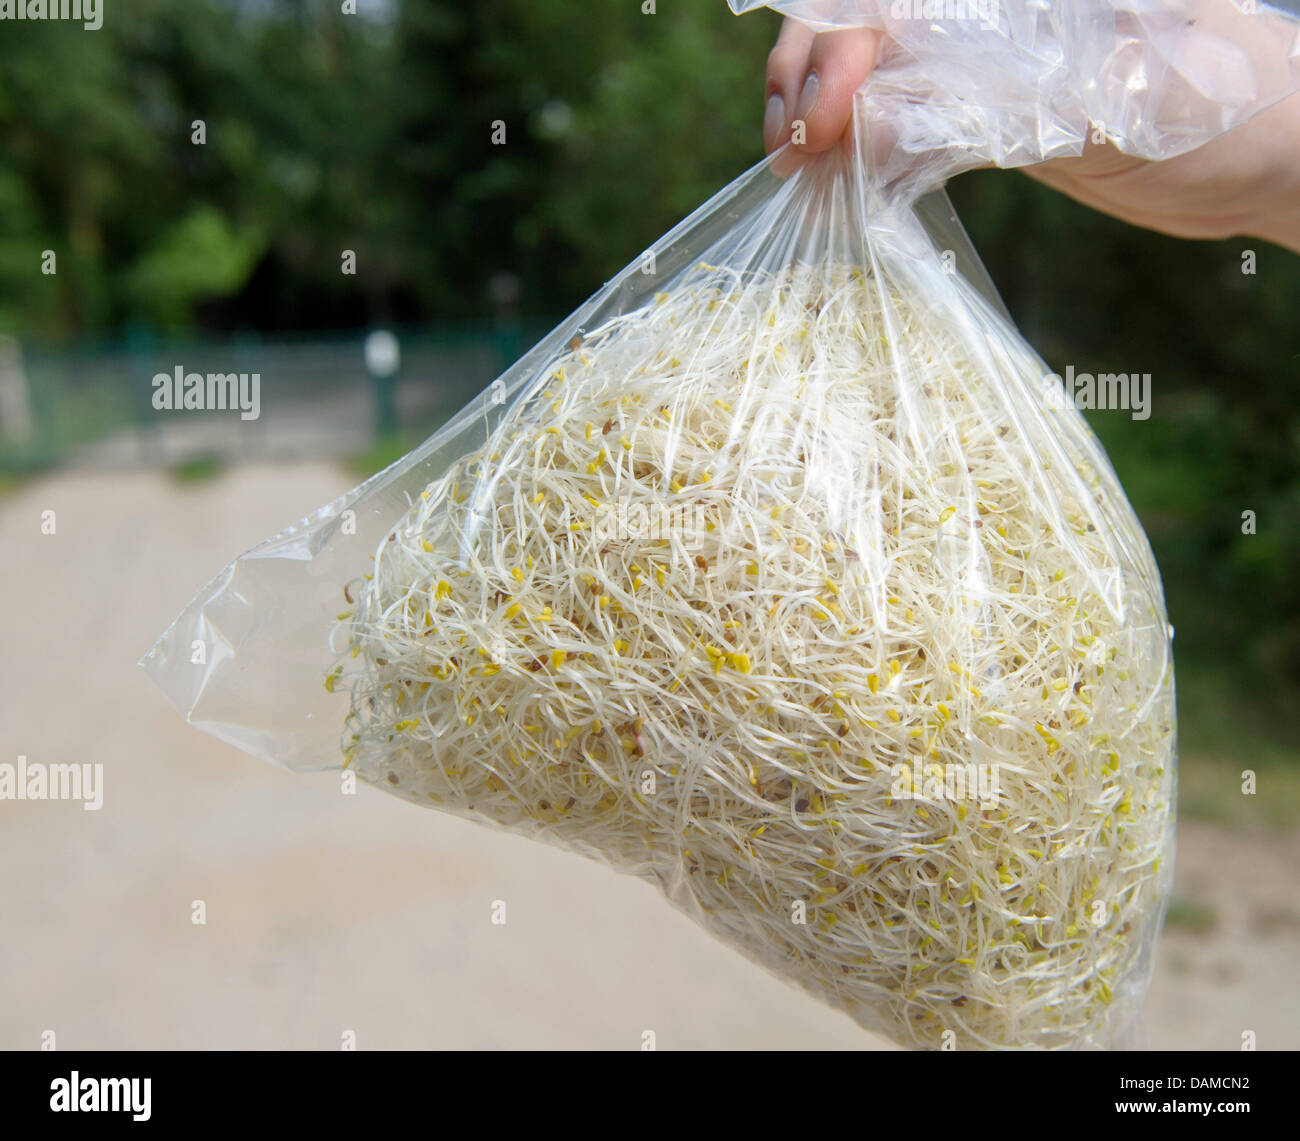 Sprouts of the market gardening company Bienenbuettel lie inside a plastic bag in Neu-Steddorf, Germany, 5 June 2011. After the suspicion that sprouts are the source of EHEC the Ministry  of Agriculture in Lower Saxony will present first results of sample investigations on 6 June 2011. Photo: HANS-JUERGEN WEGE Stock Photo